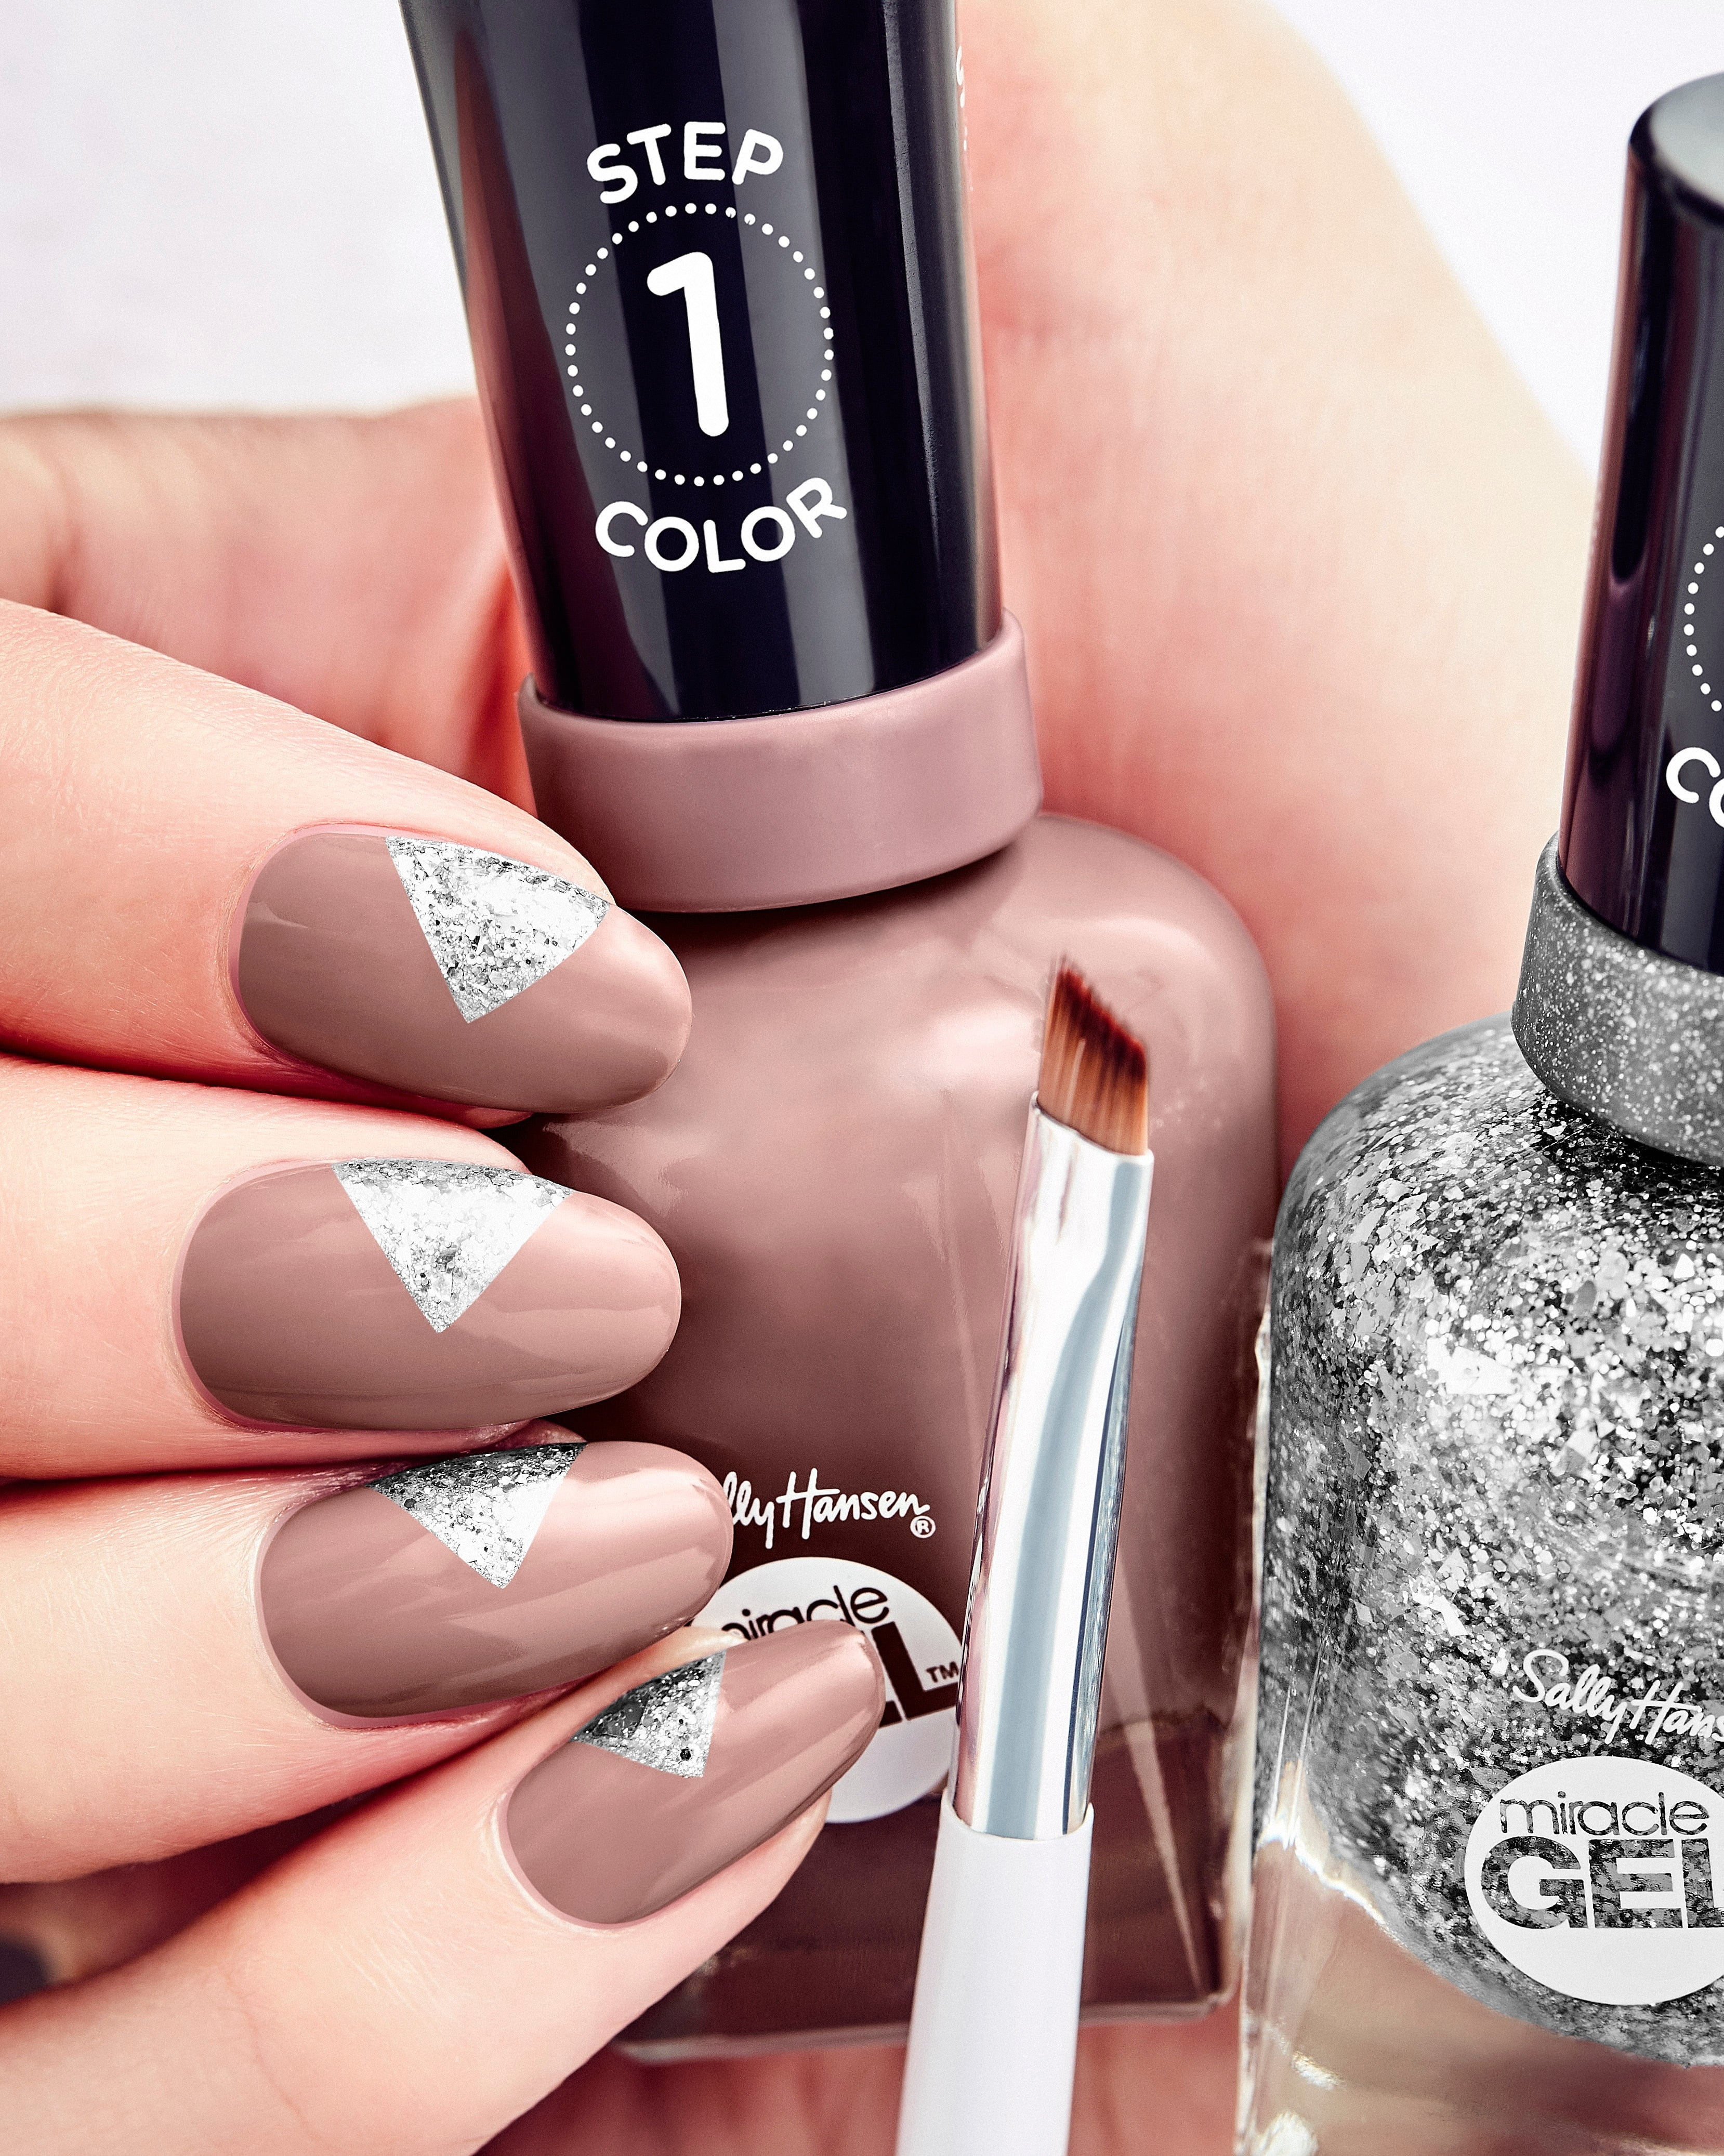 6 Trending Gel Nail Art Looks to Try at Home This Autumn